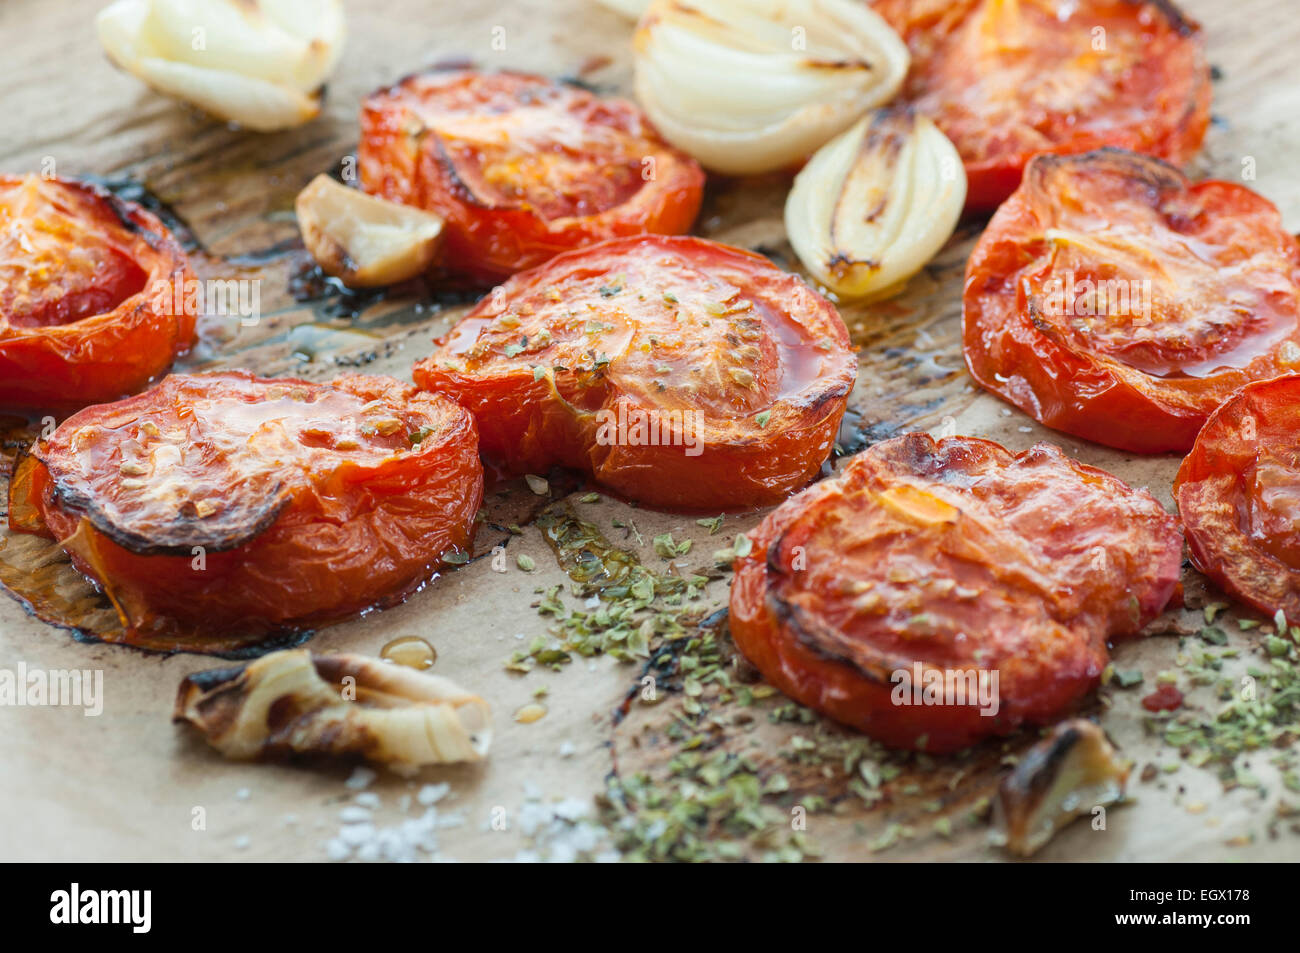 Oven roasted tomato, onion and garlic spiced with oregano and sea salt. Stock Photo